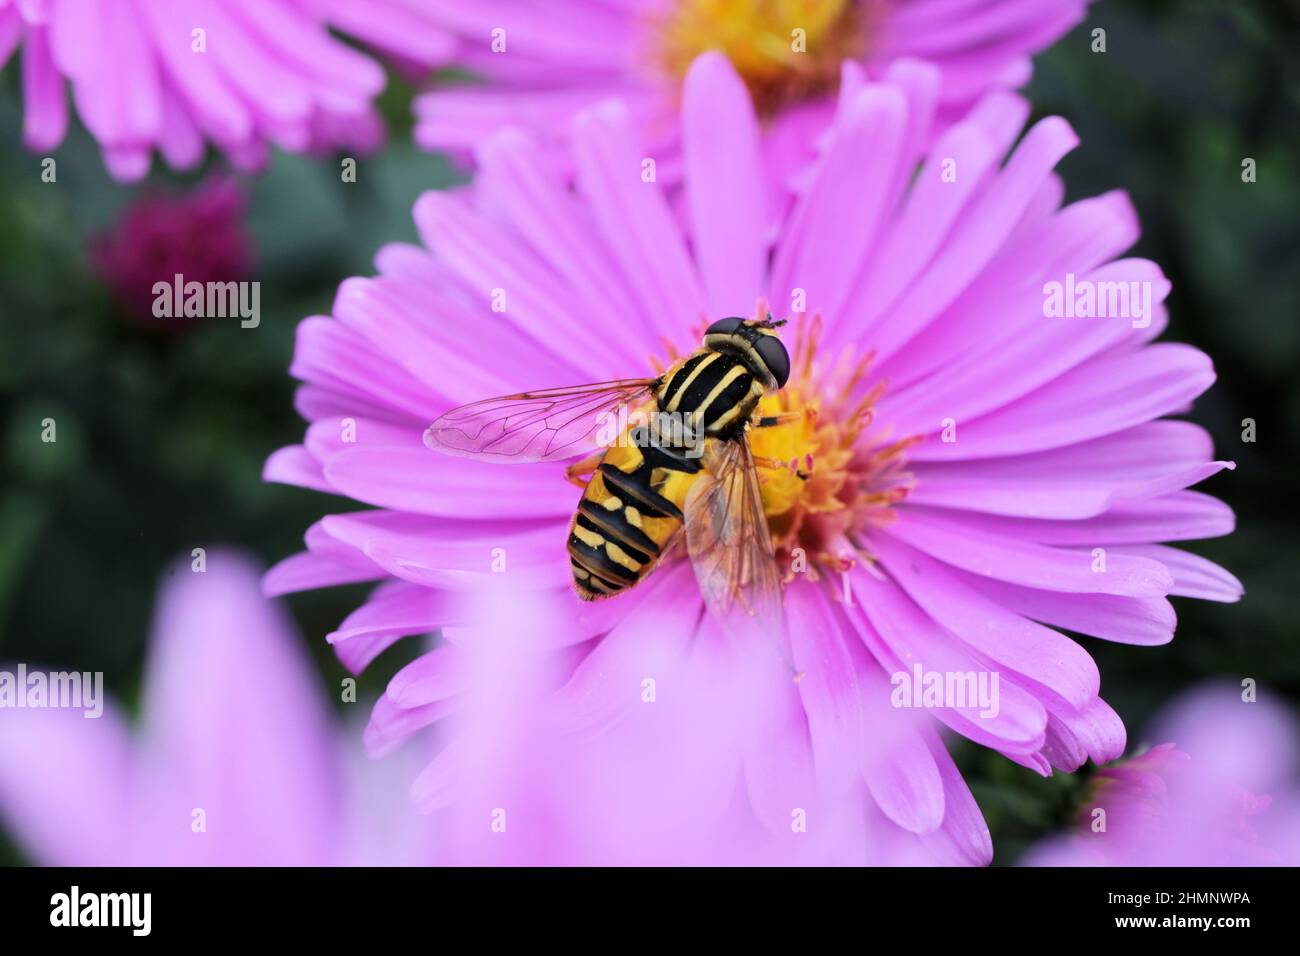 Helophilus pendulus, footballer hoverfly on an aster flower Stock Photo